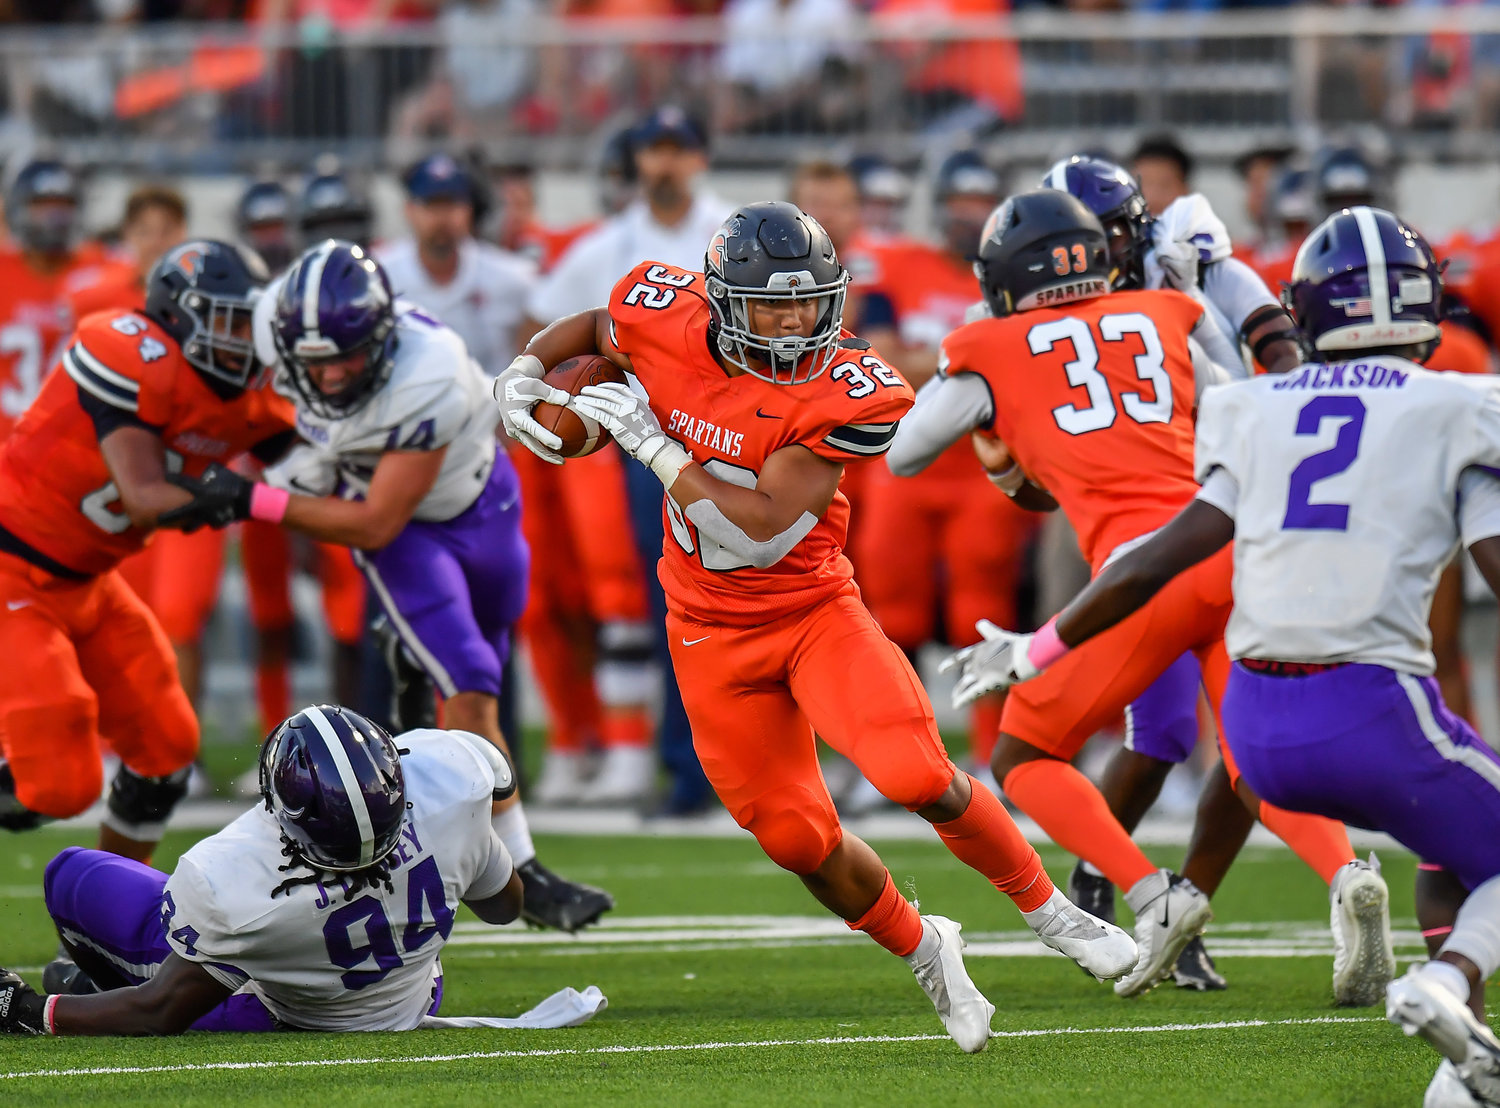 Katy, Tx. Oct 8, 2021: Seven Lakes Michael Amico #32 carries the ball cutting back up the middle during a District 19-6A game between Seven Lakes and Morton Ranch at Legacy Stadium in Katy. (Photo by Mark Goodman / Katy Times)